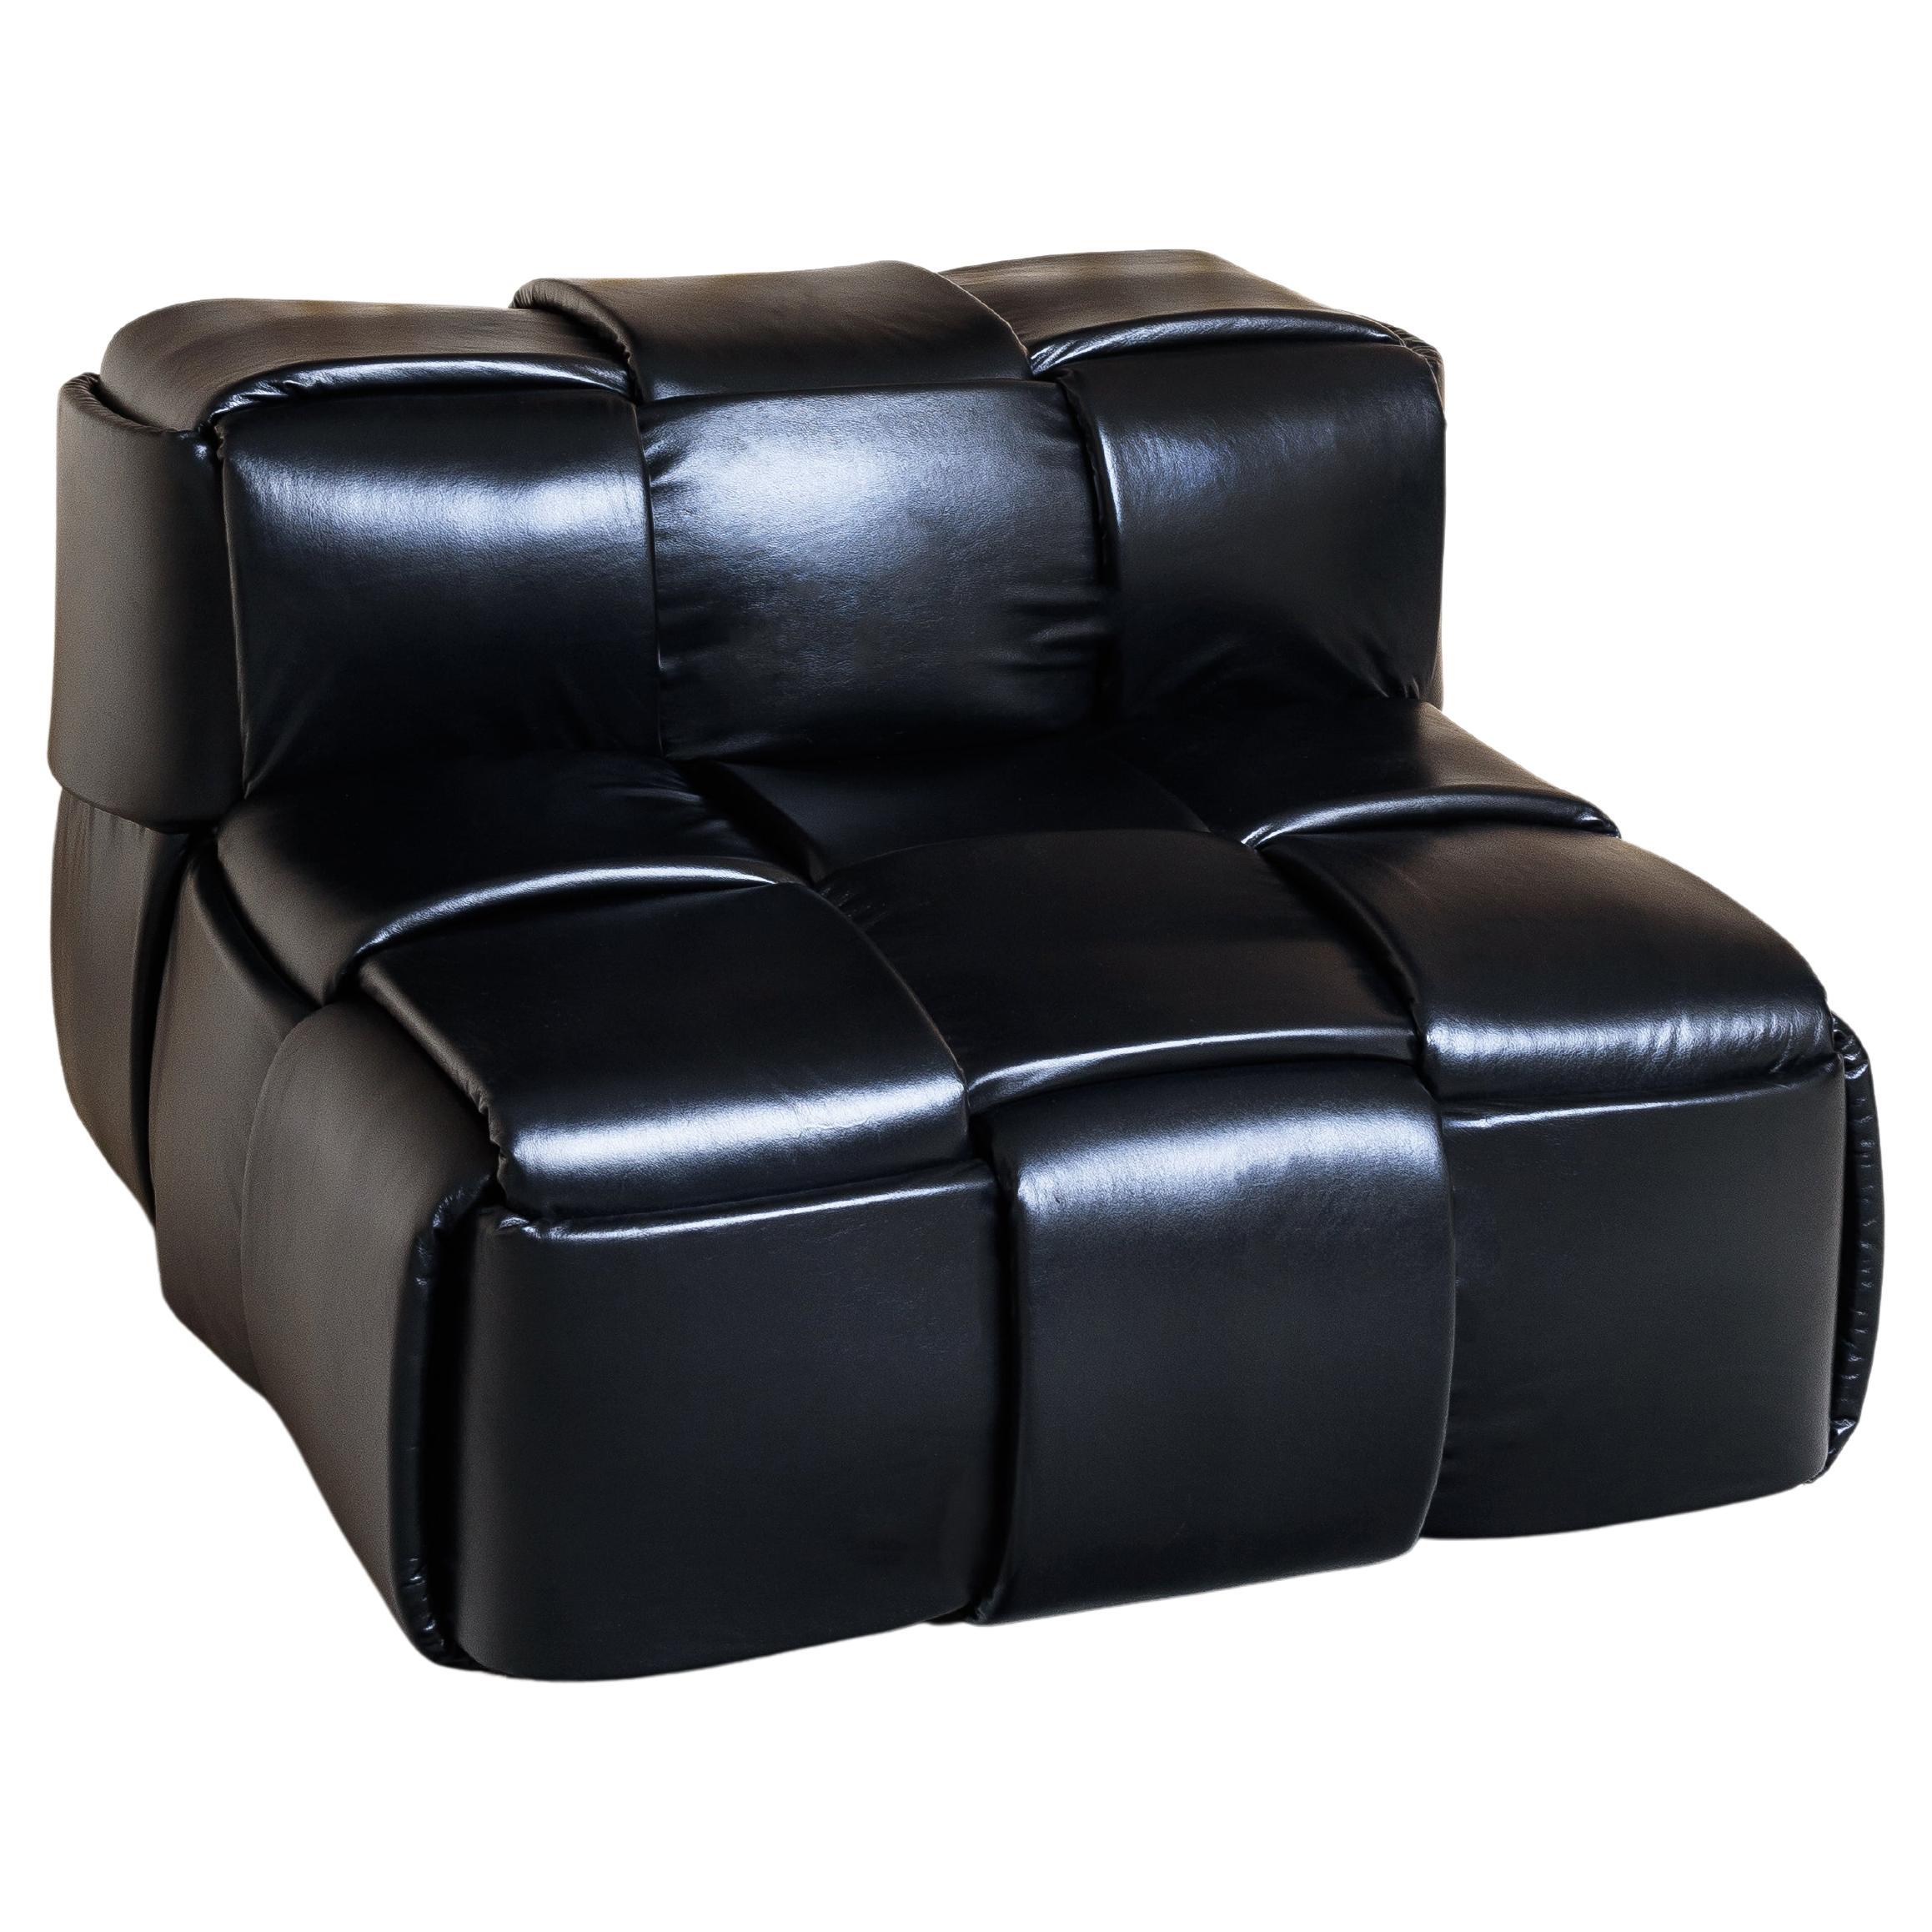 Trama G Lounge Chair - Leather For Sale